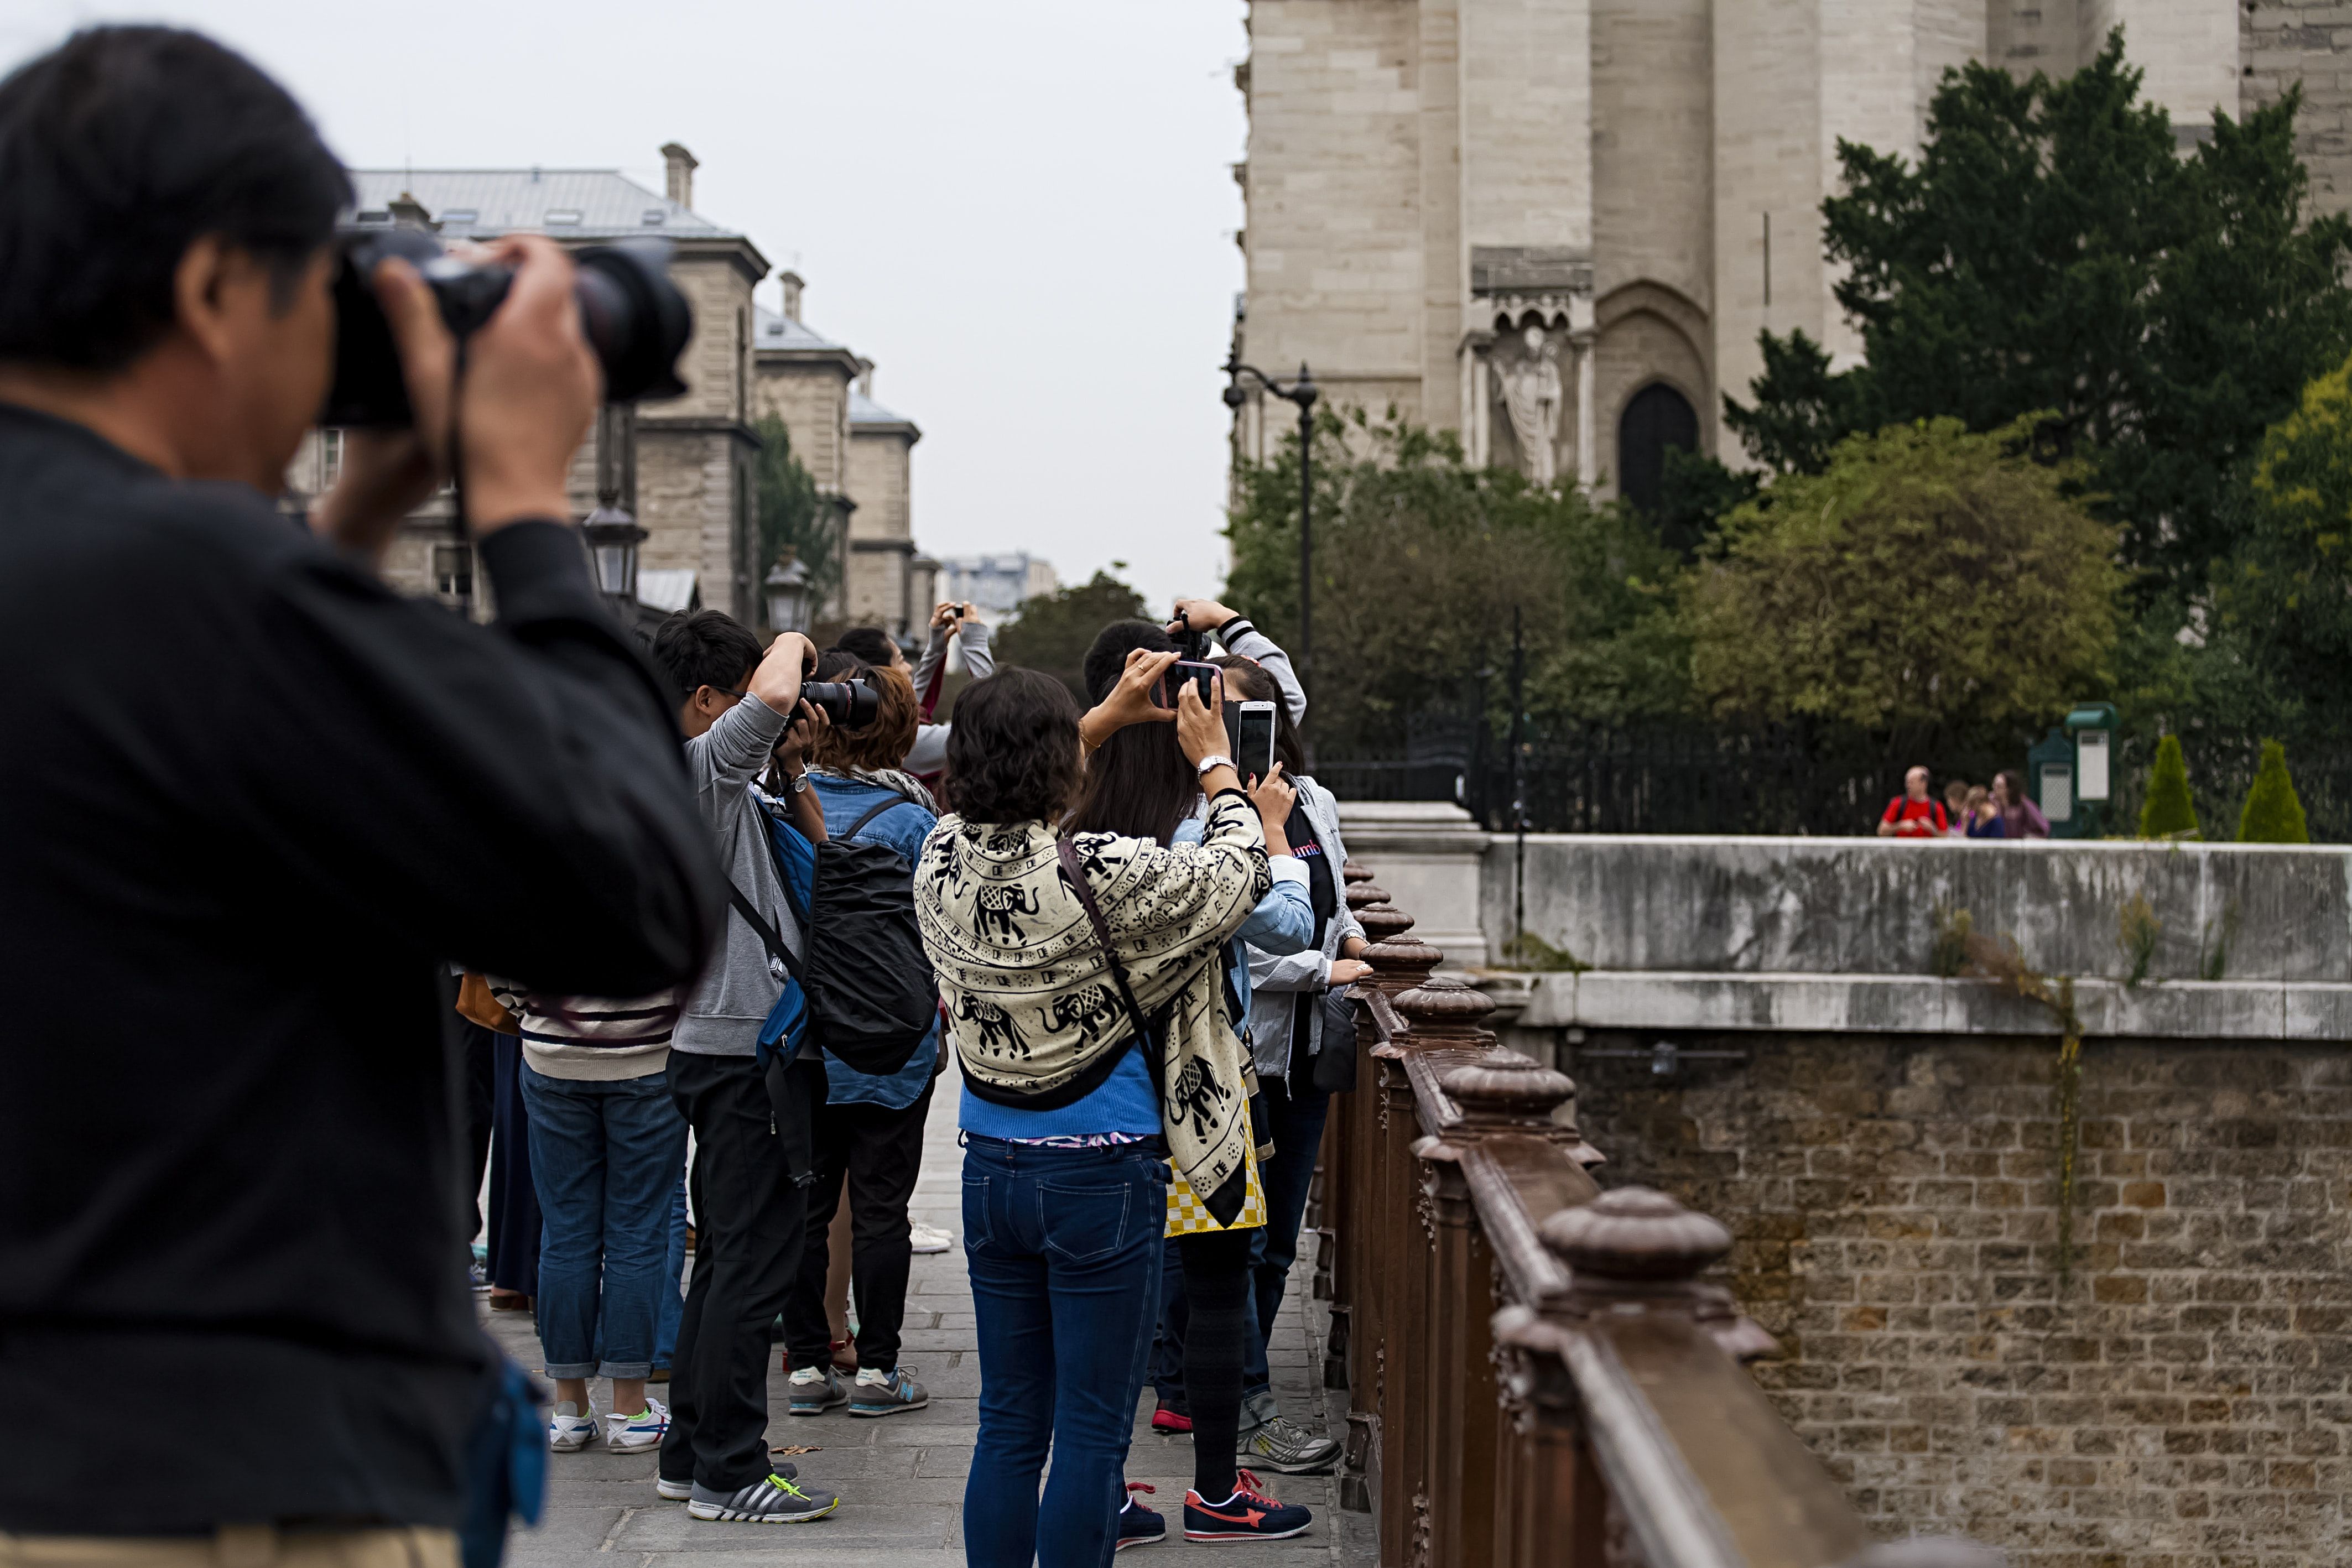 Photo of various people taking photos in the same place